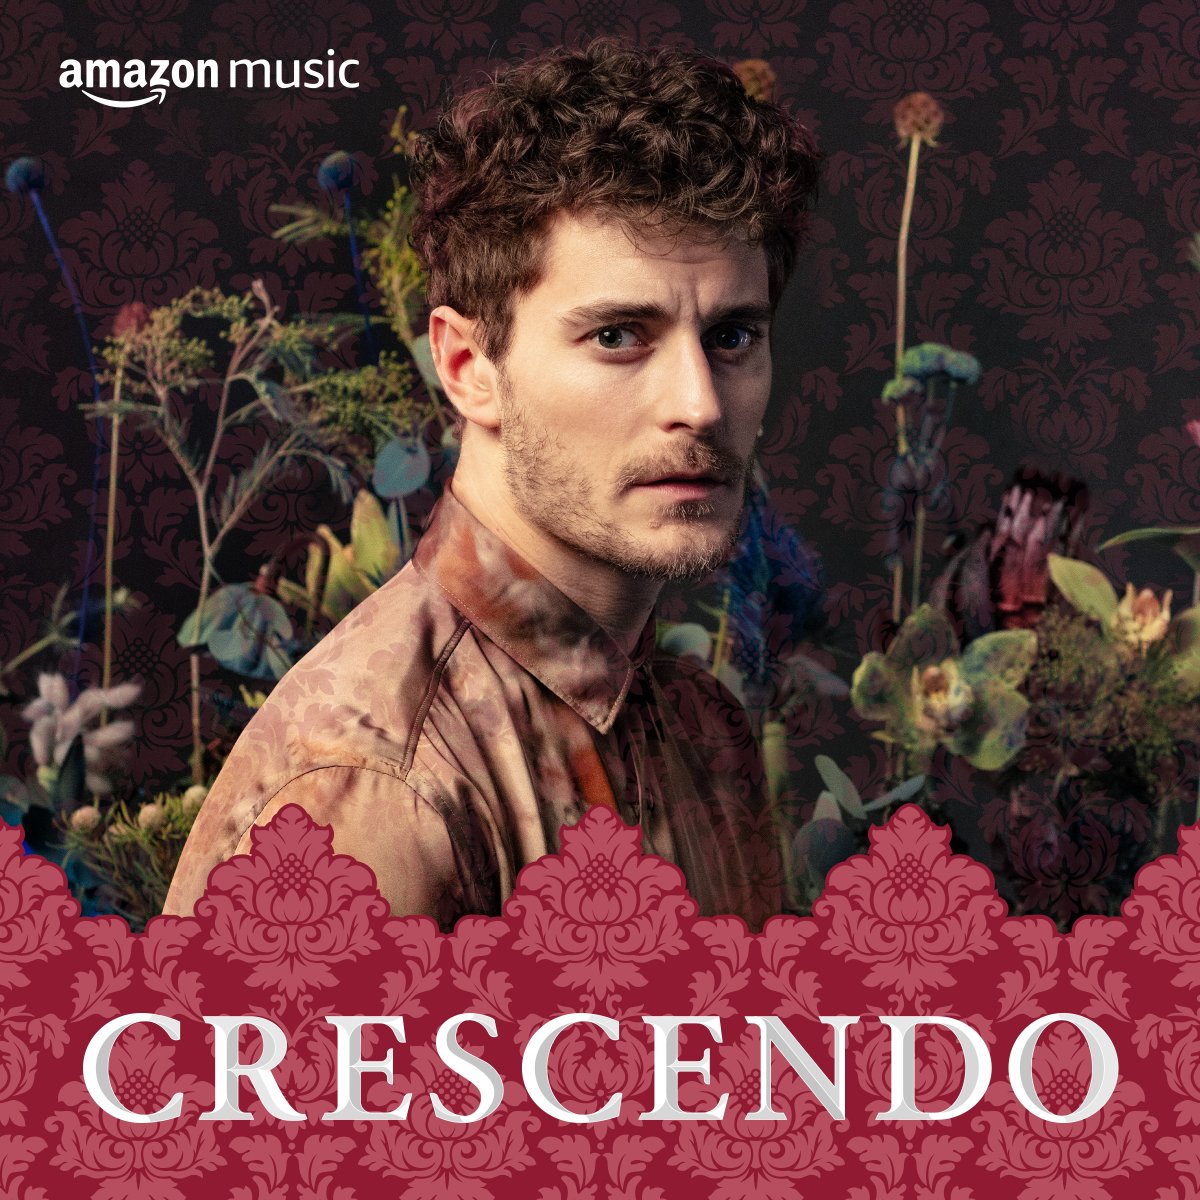 Jakub Józef Orliński adorns the cover of Amazon's Crescendo Playlist this week. Check out tracks by him plus a whole host of other musicians. 🎧 w.lnk.to/jjocres